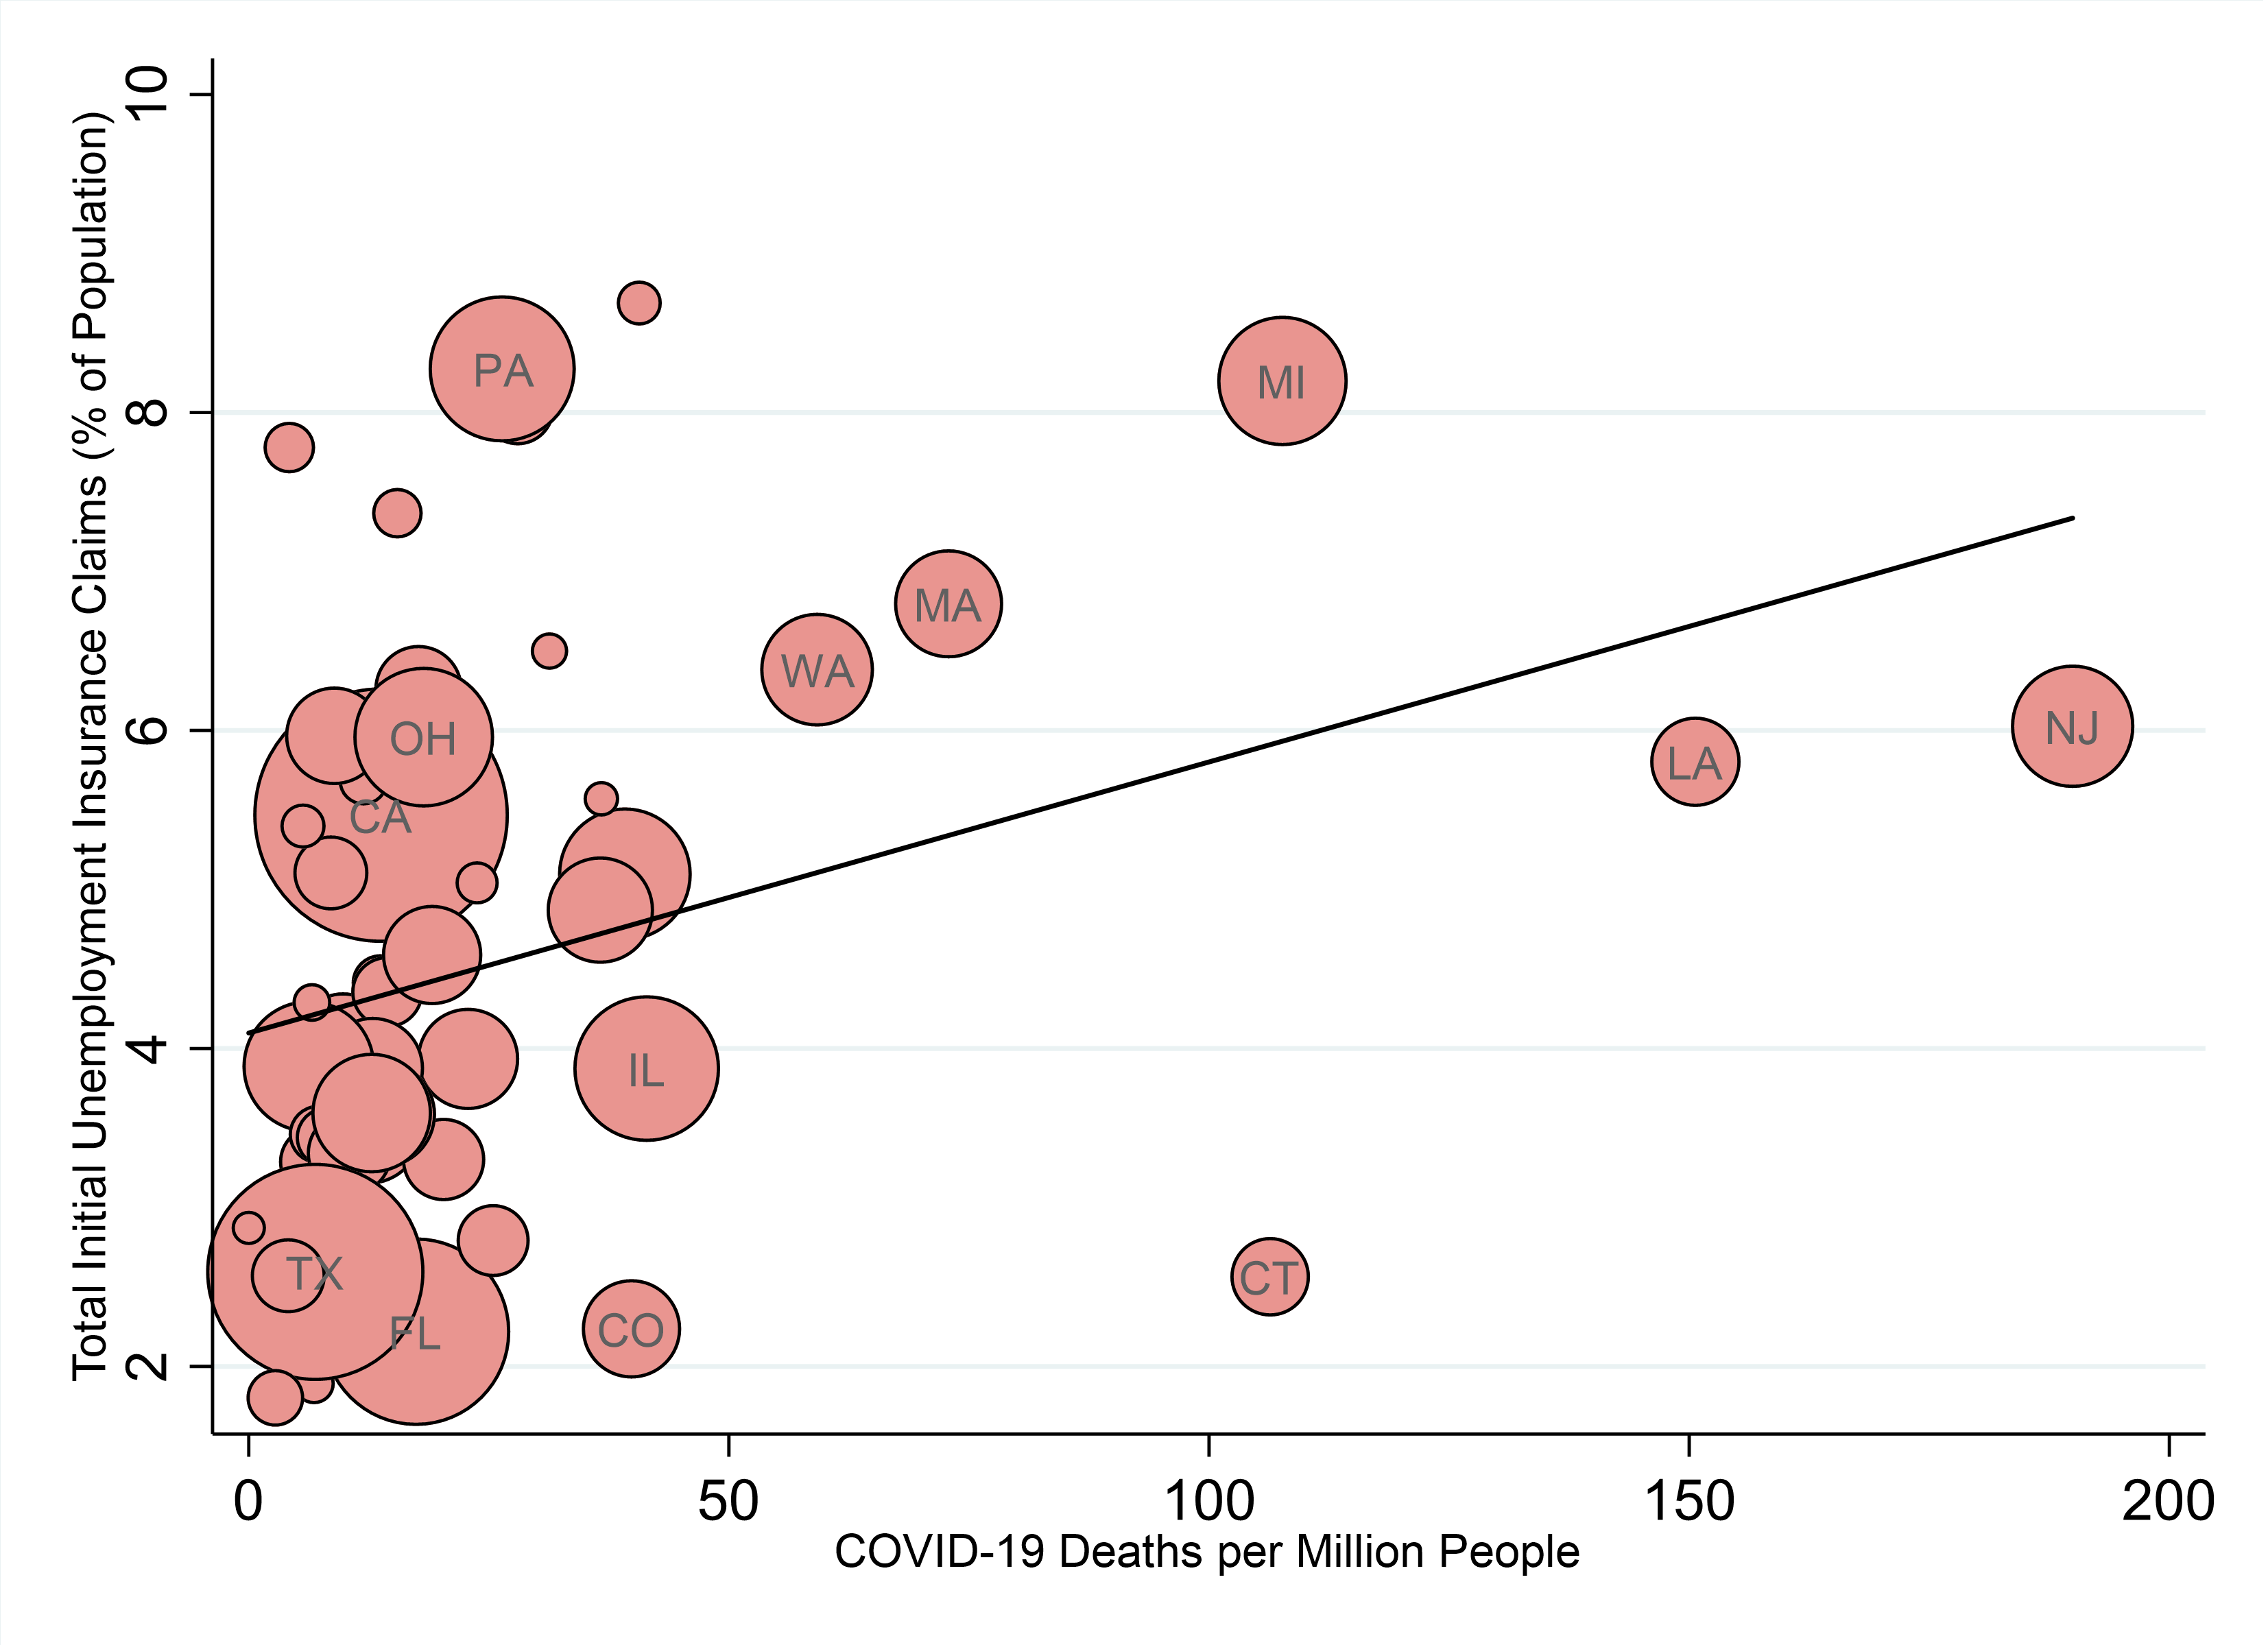 Scatter plot showing initial jobless claims as a share of population and the number of COVID-19 deaths per million